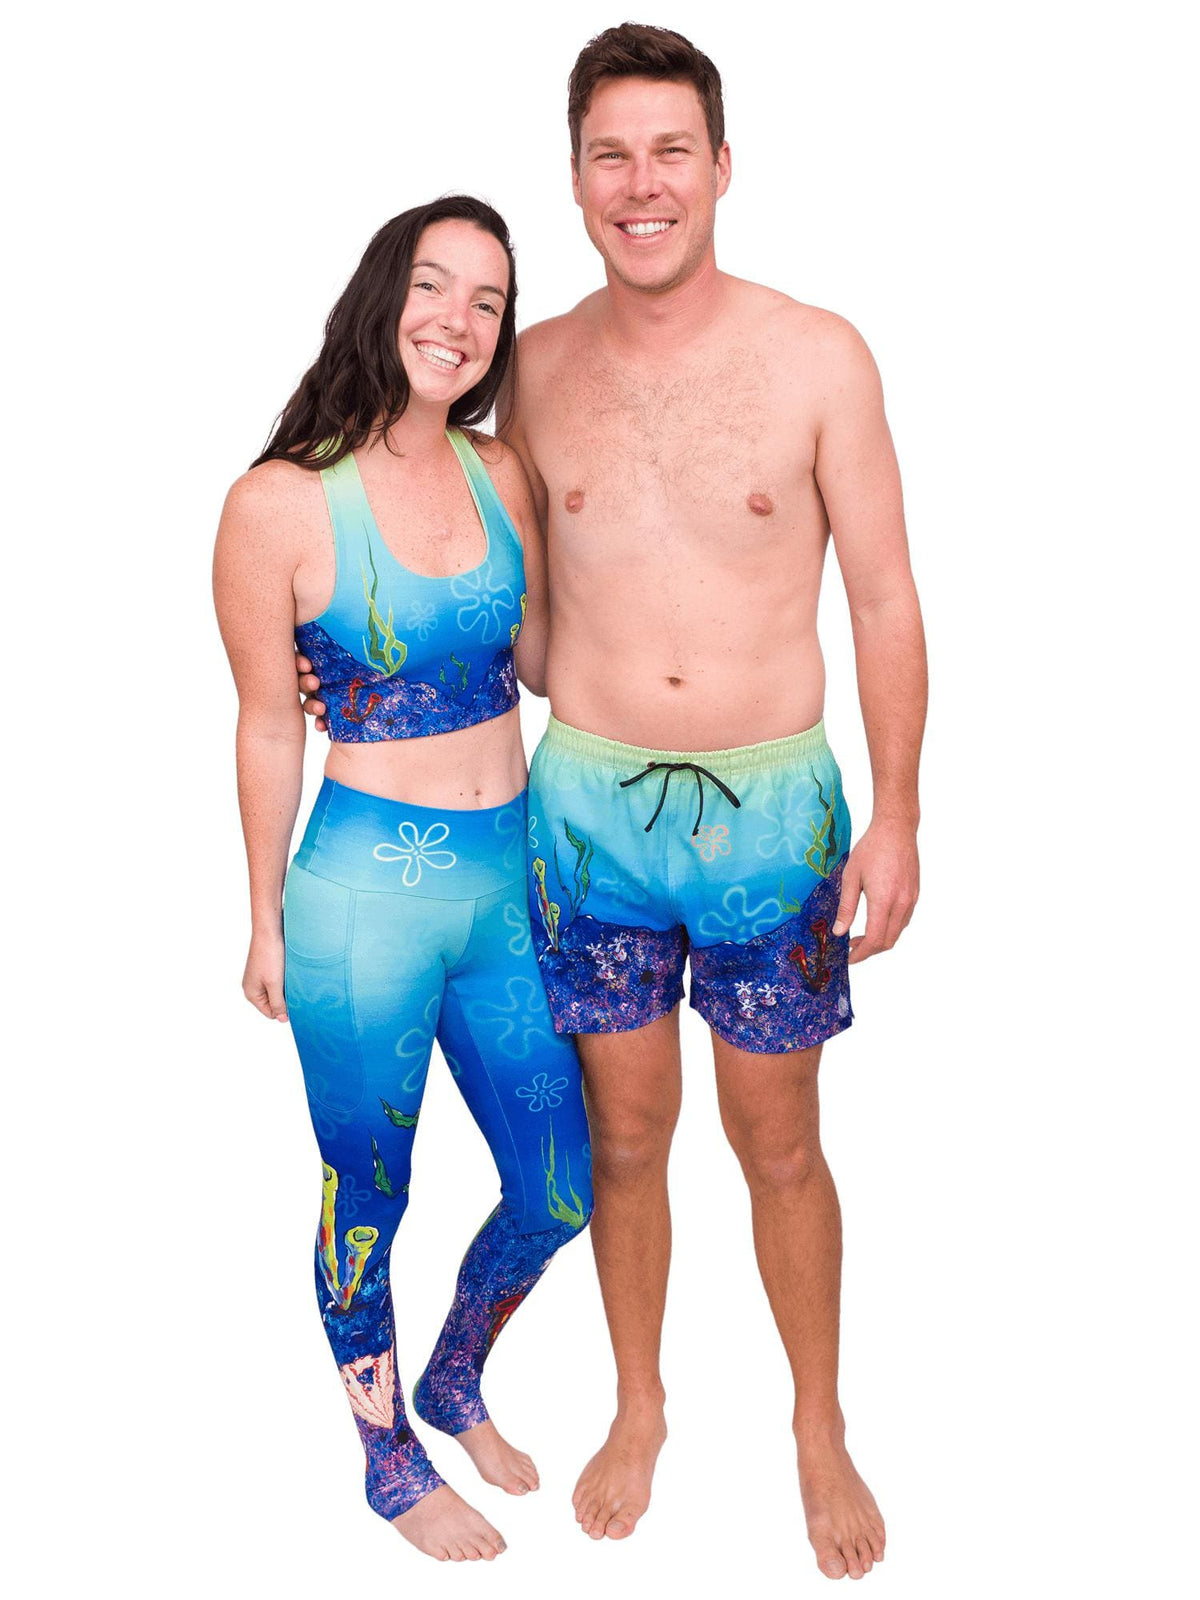 Model: Maddie is the Program &amp; Outreach Director at Debris Free Oceans and a restoration ecology educator. She is 5’8”, 135lbs, and wearing a M. Dalton is a coral biologist who studies the relationship between communities and reef ecosystems. He is 6’3”, 200lbs and is wearing a L.